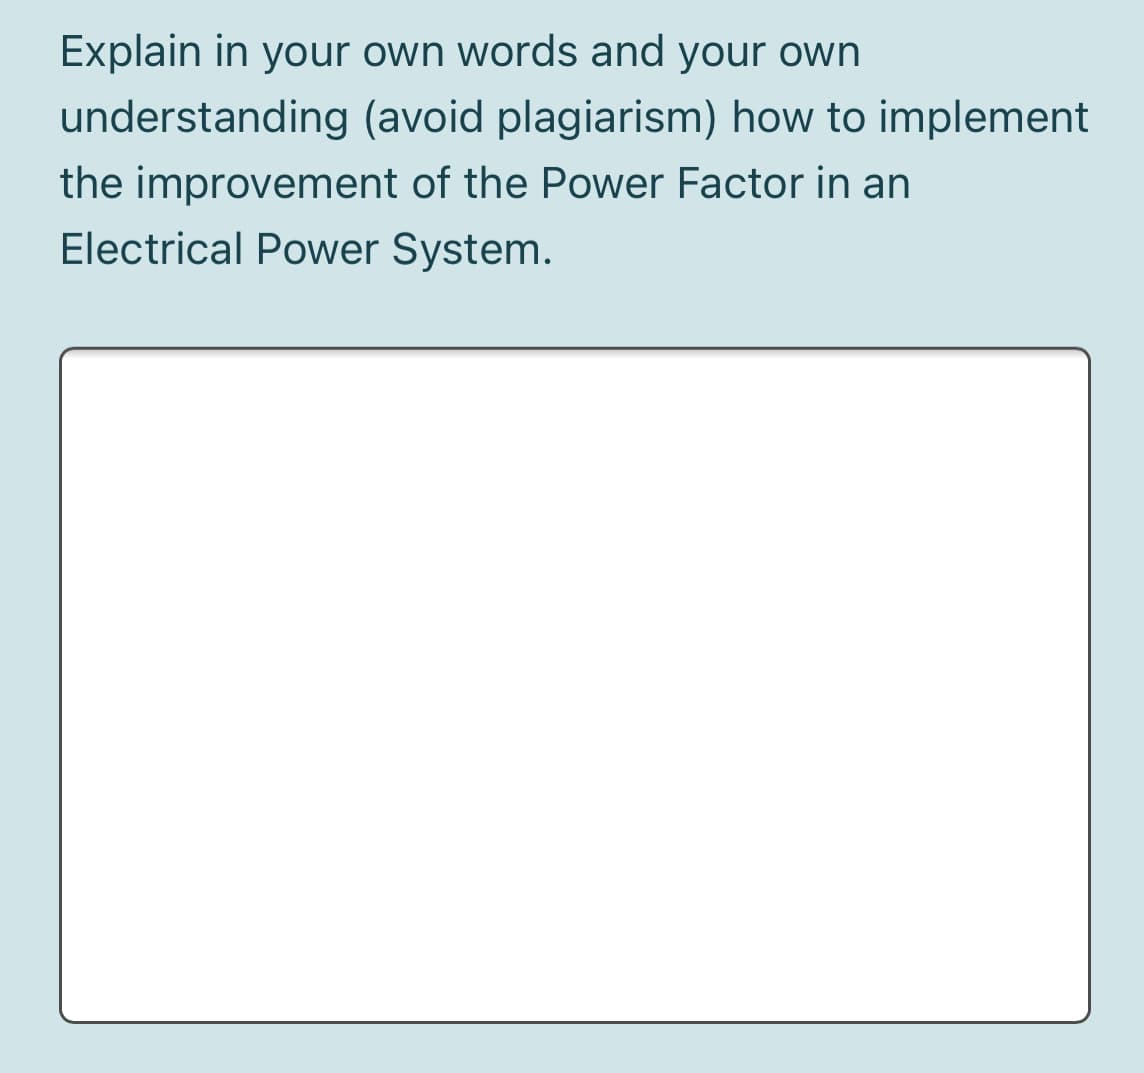 Explain in your own words and your own
understanding (avoid plagiarism) how to implement
the improvement of the Power Factor in an
Electrical Power System.
